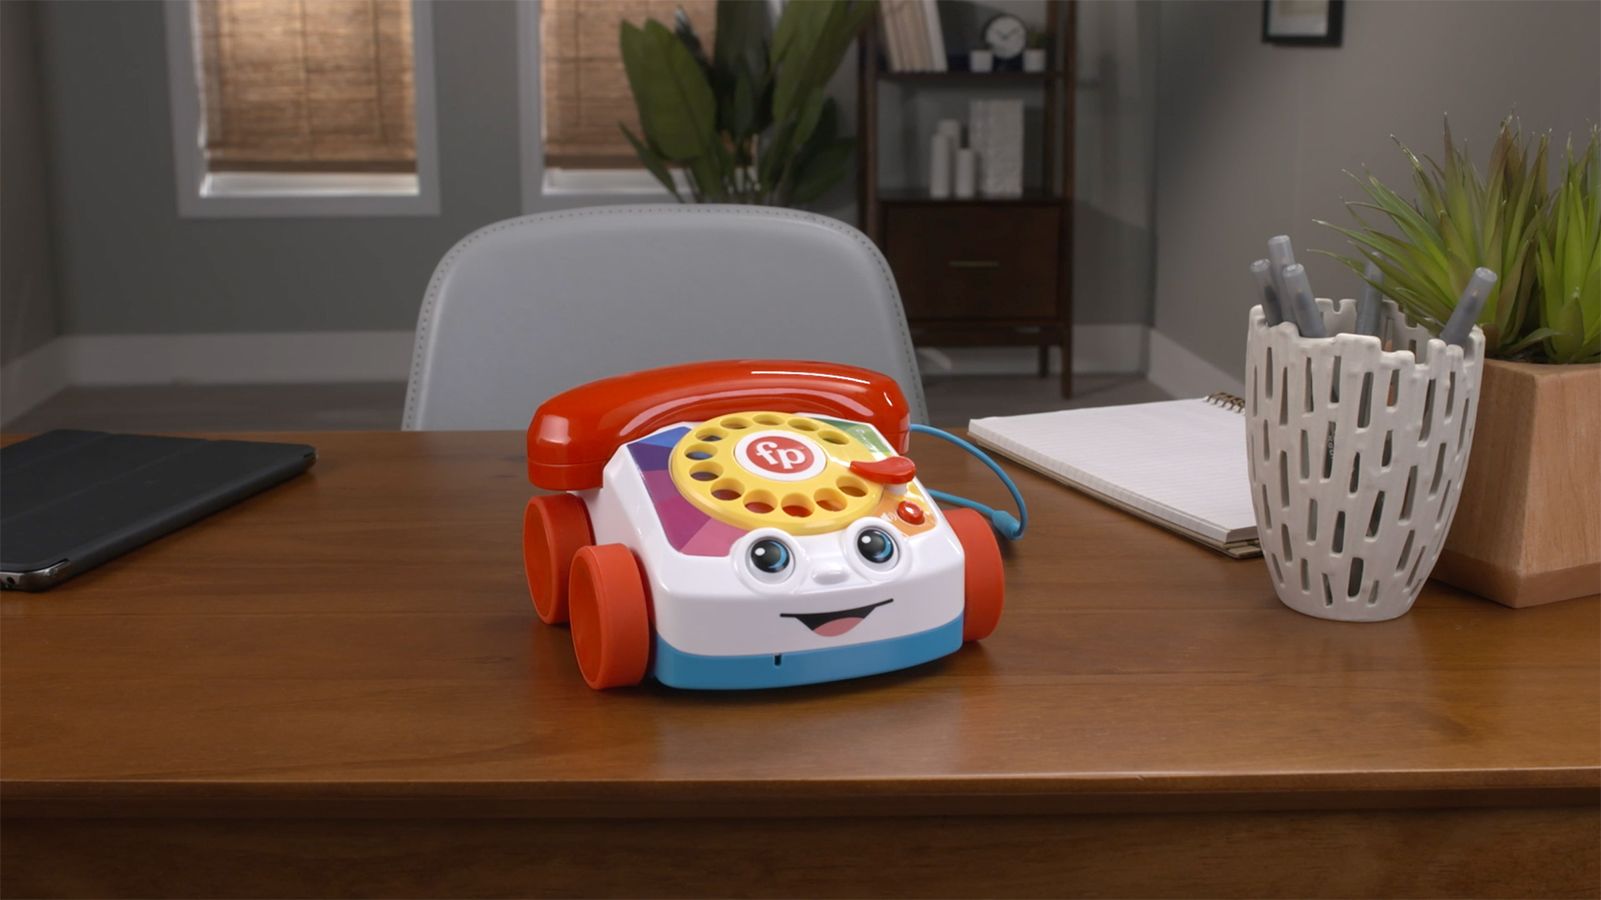 Fisher-Price's new Chatter Telephone actually makes calls